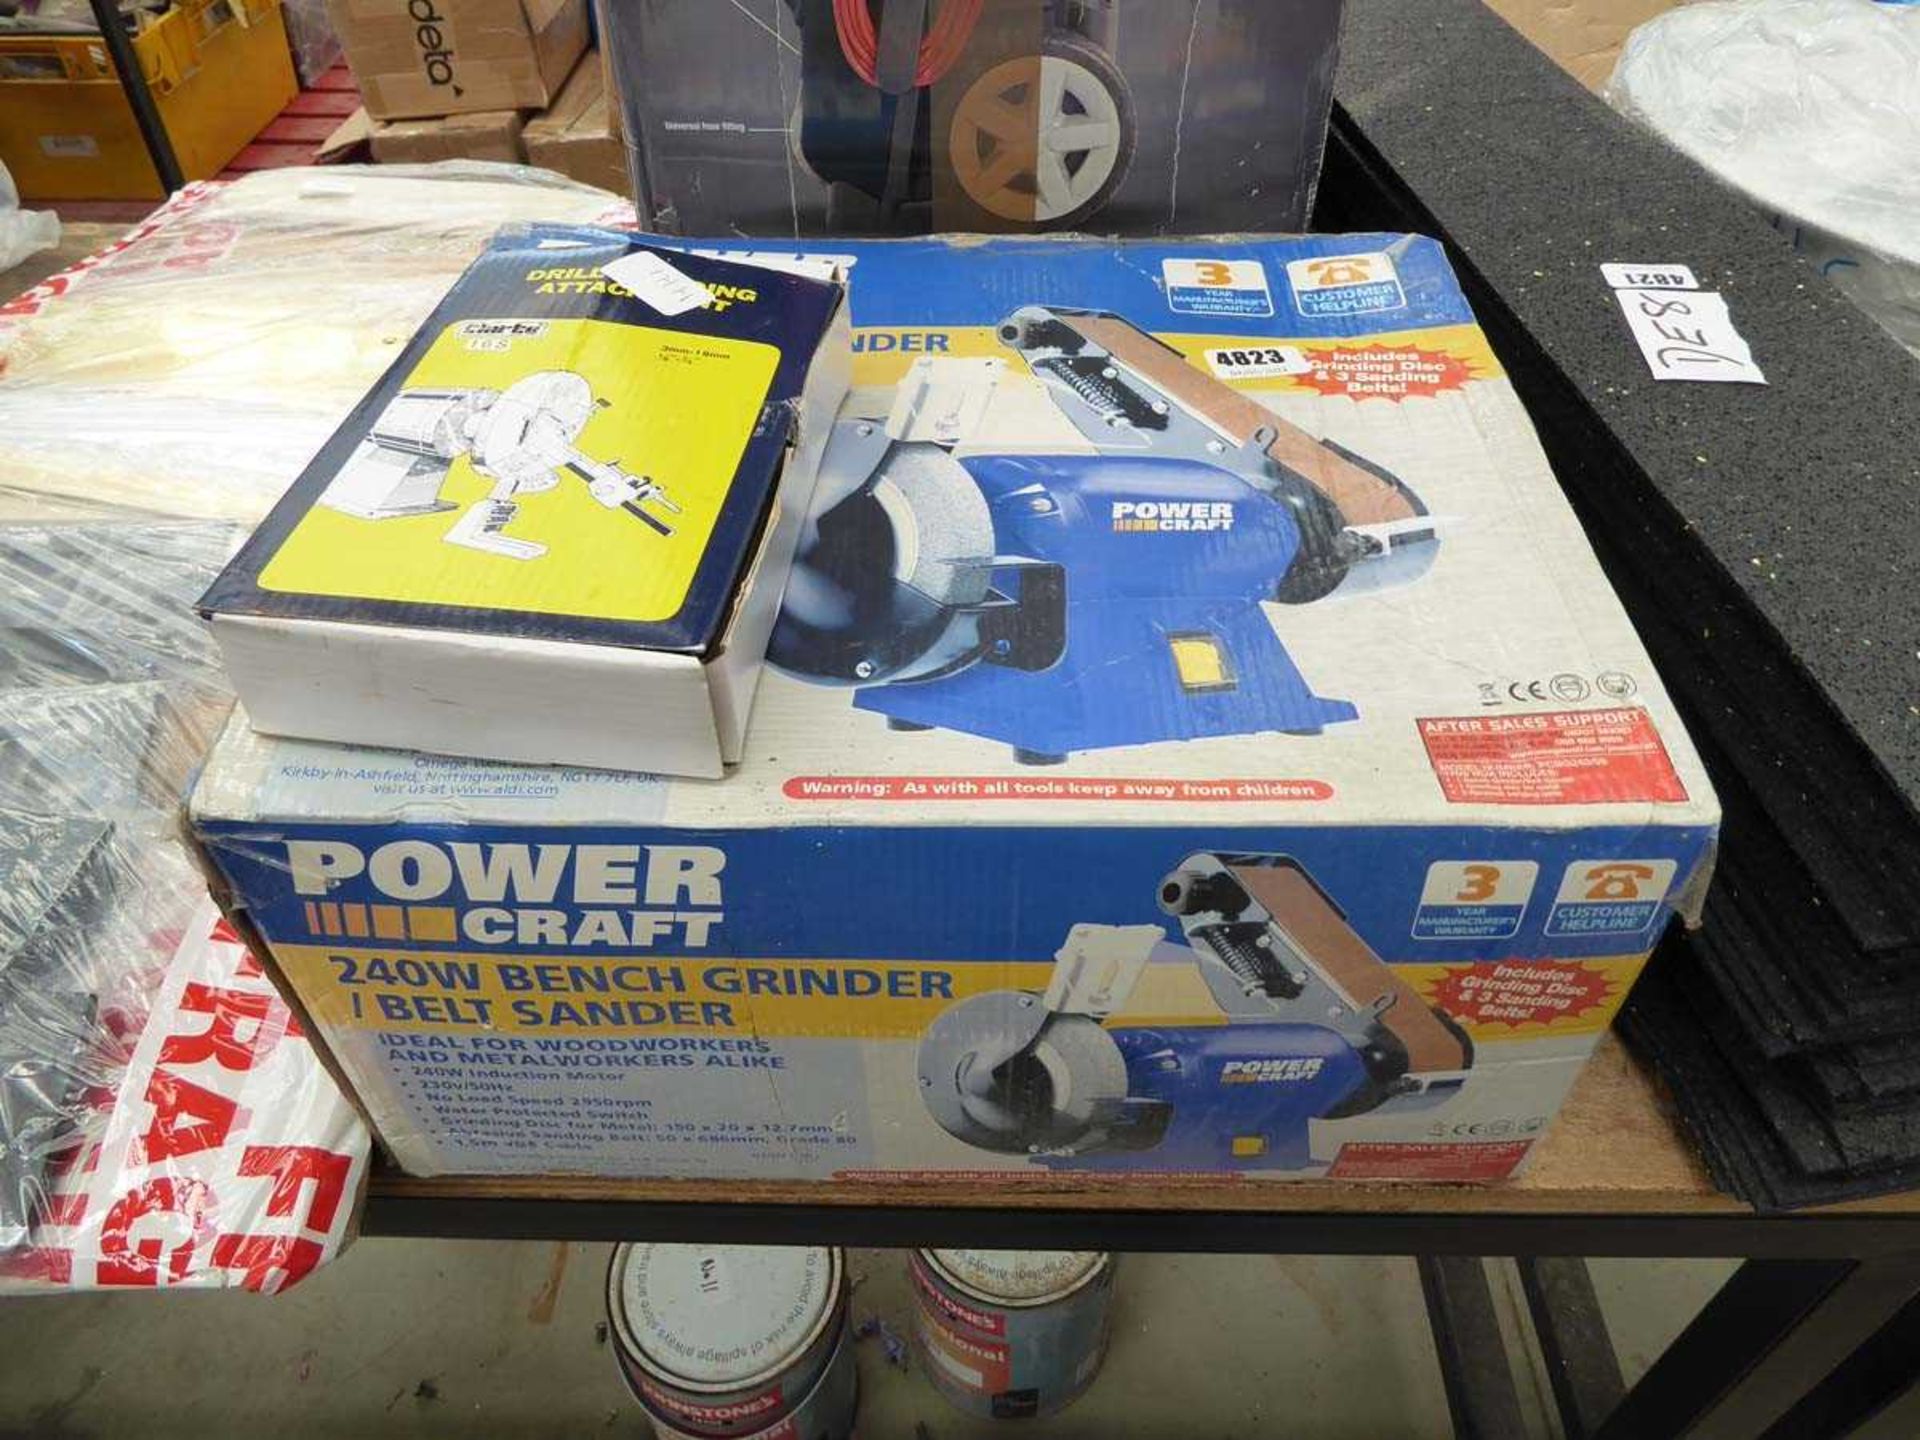 Powercraft bench grinder and belt sander in box with attachment